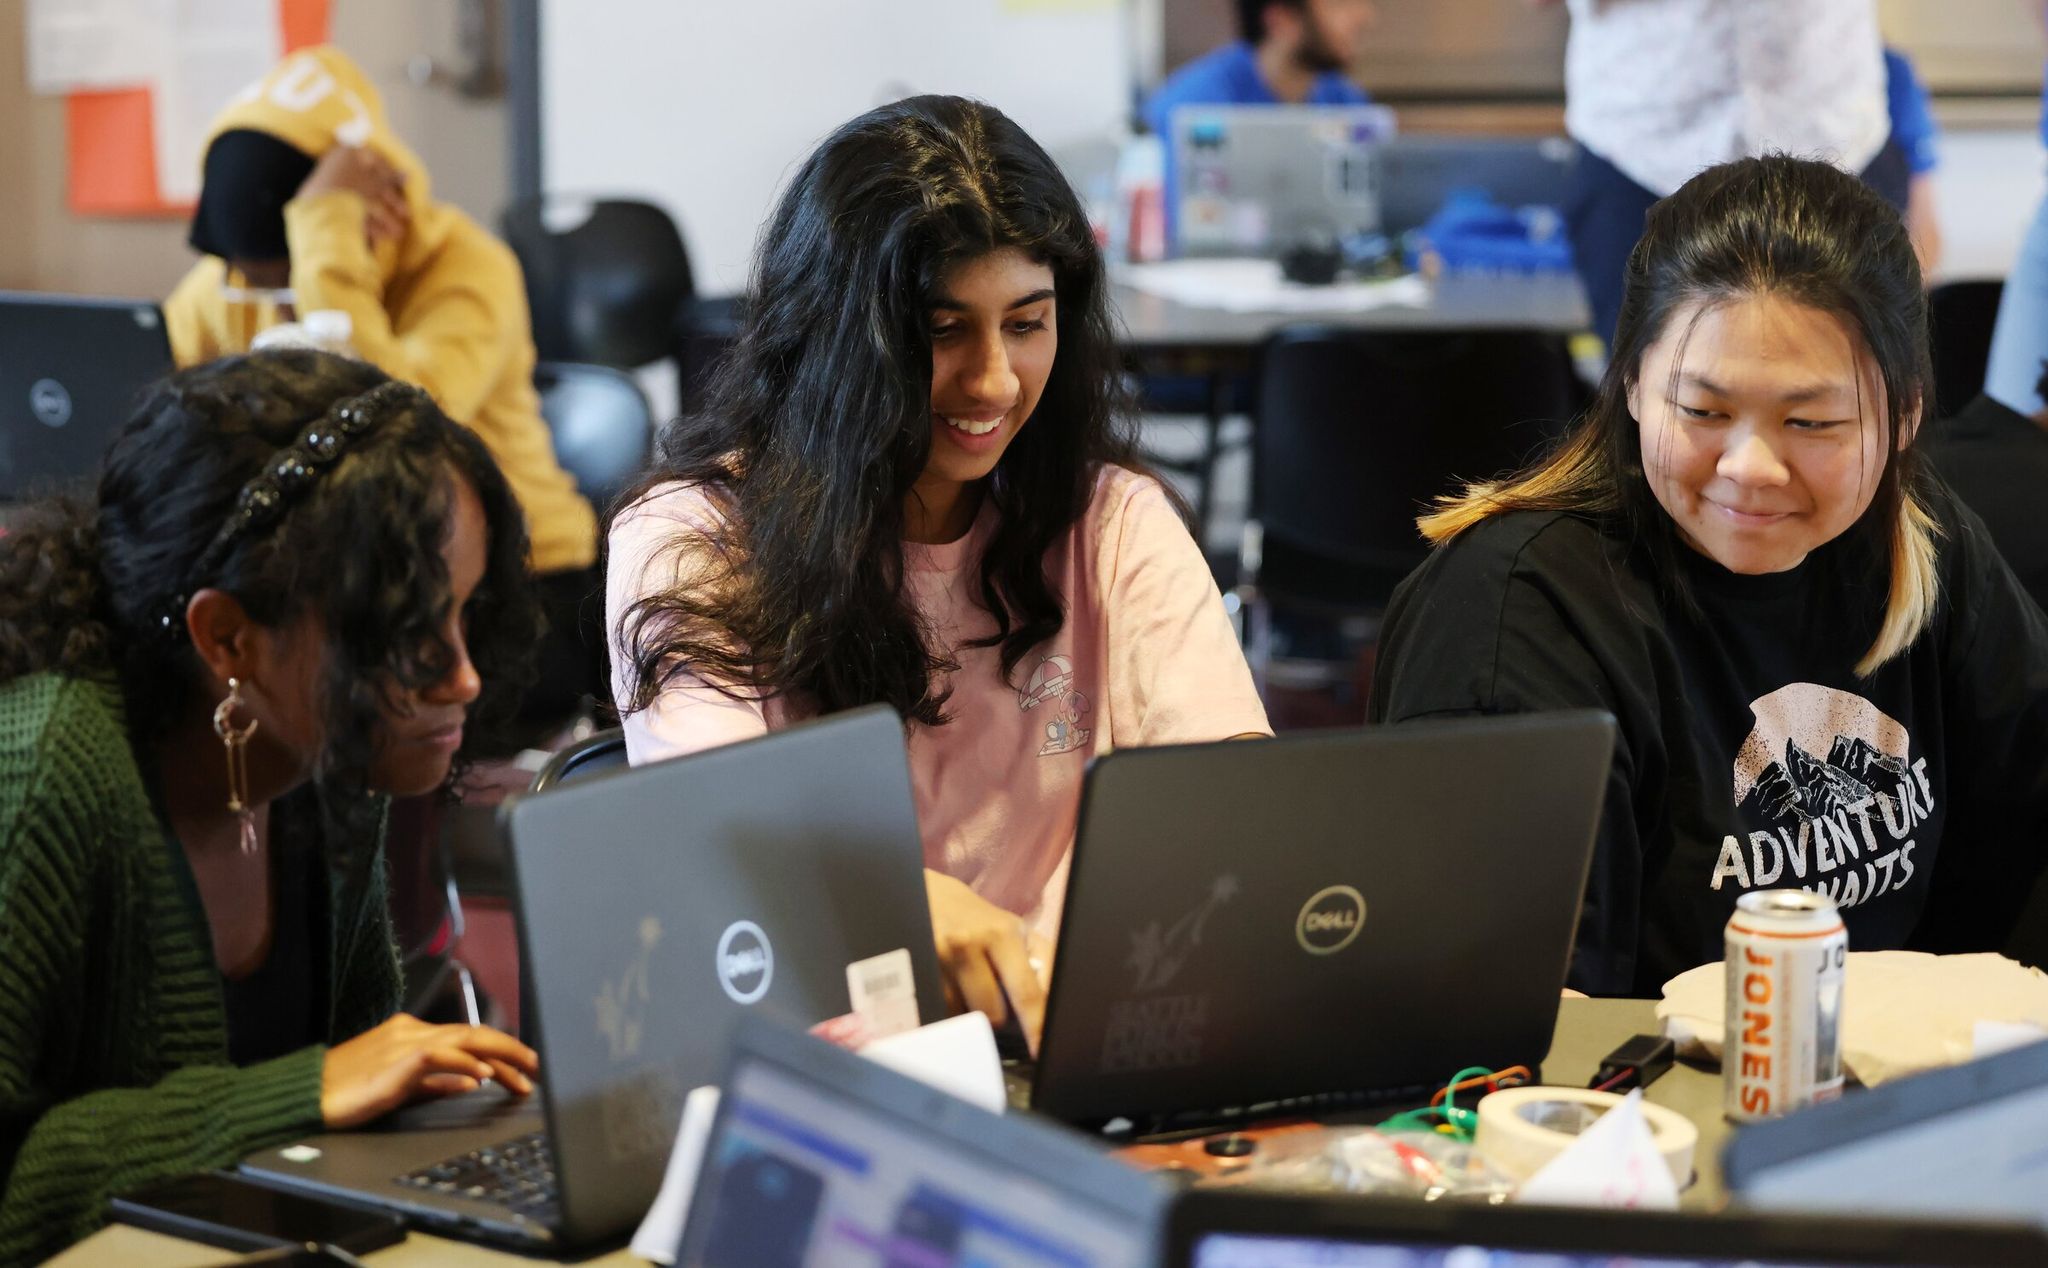 High school students Nariah McGee, left, Sahar Abid and Manyi Zhao discuss their project assignment during Amazon’s Future Engineer summer program at Seattle World School on July 27.